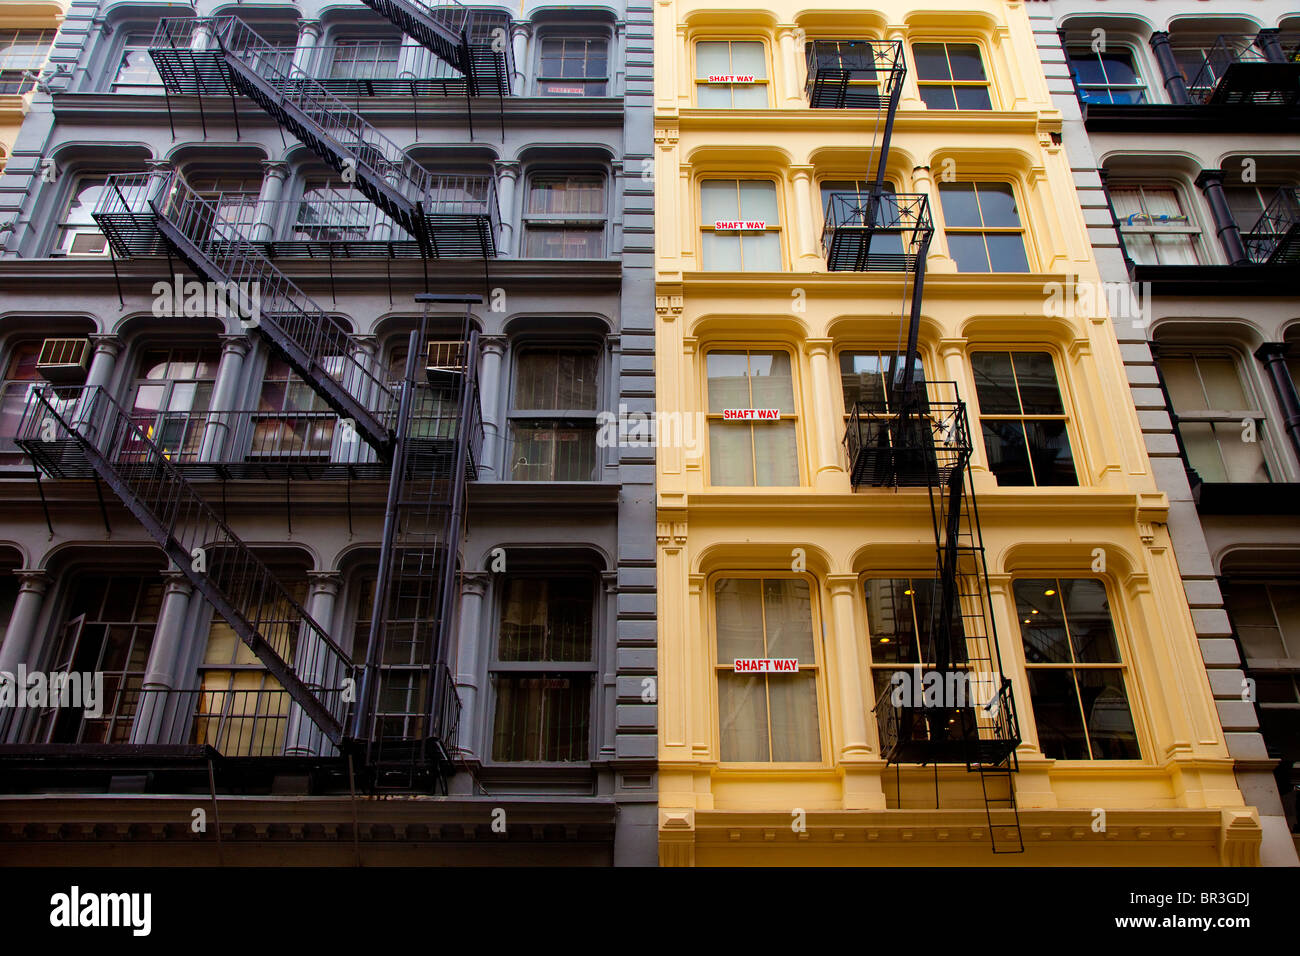 Buildings with fire escapes in SOHO, New York City, USA Stock Photo